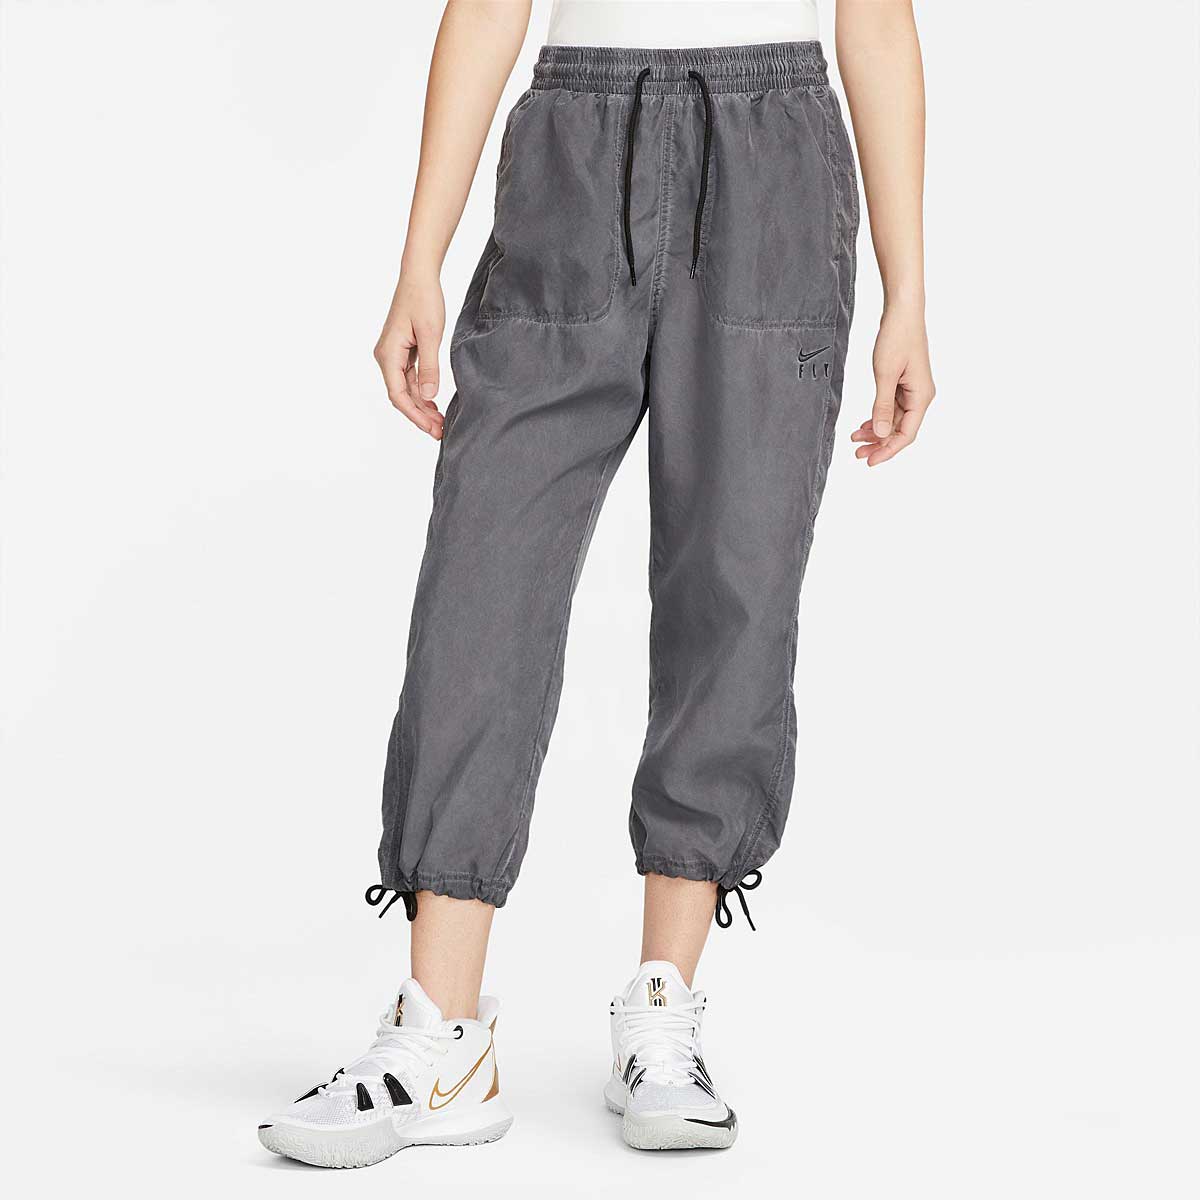 Nike Dri-Fit Retro Fly Sustainable Pant Womens, Black/Anthracite